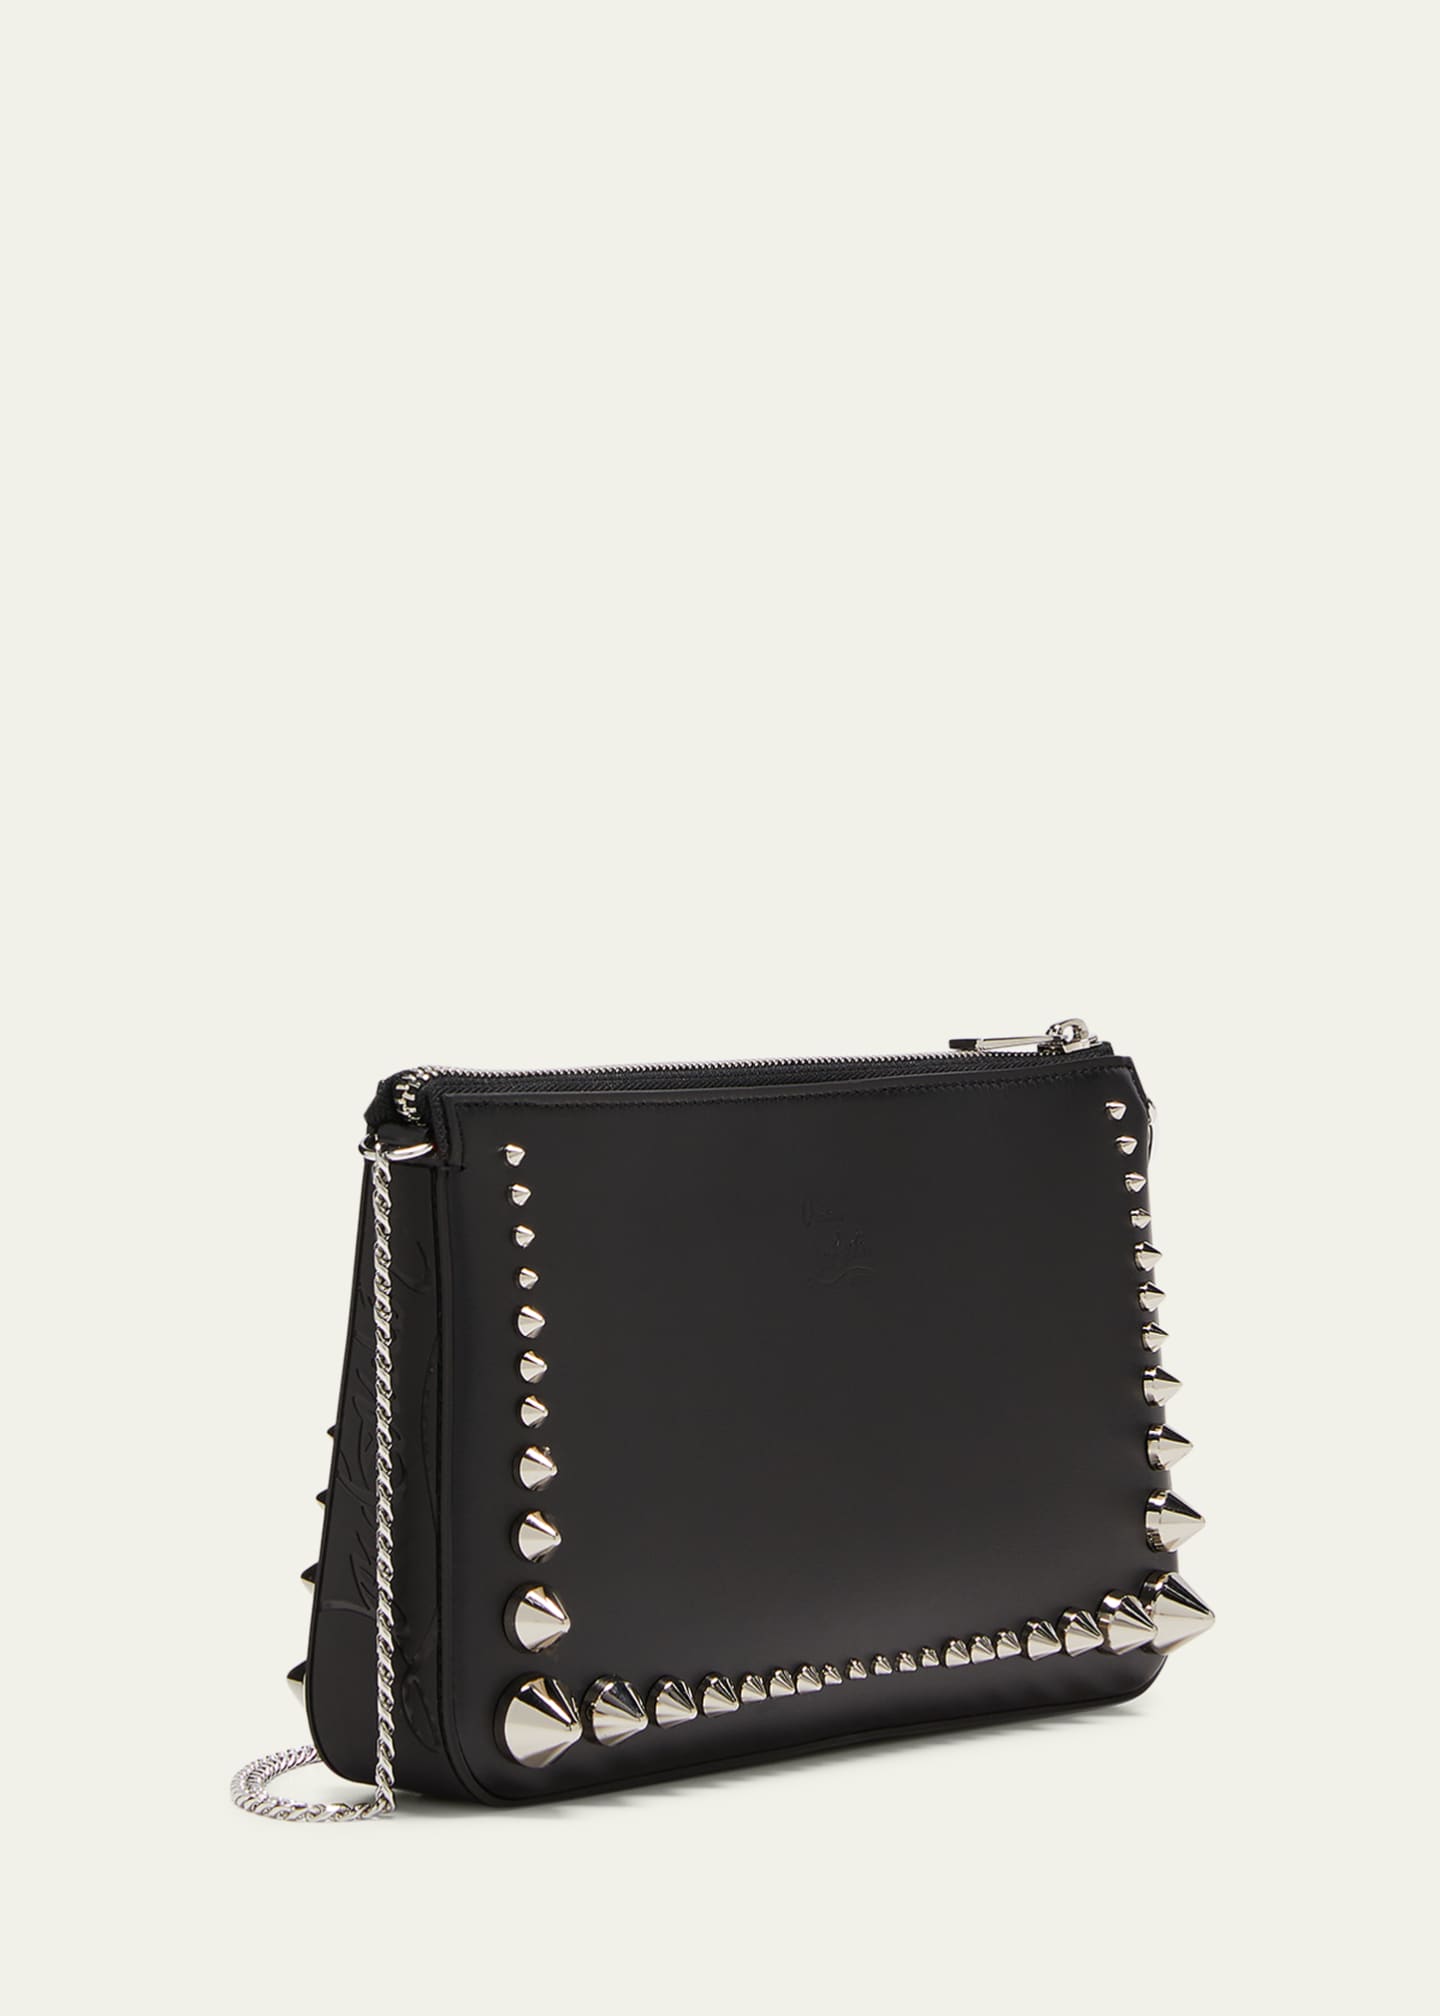 Christian Louboutin Loubila Shoulder Bag in Leather with Degrade Spikes ...